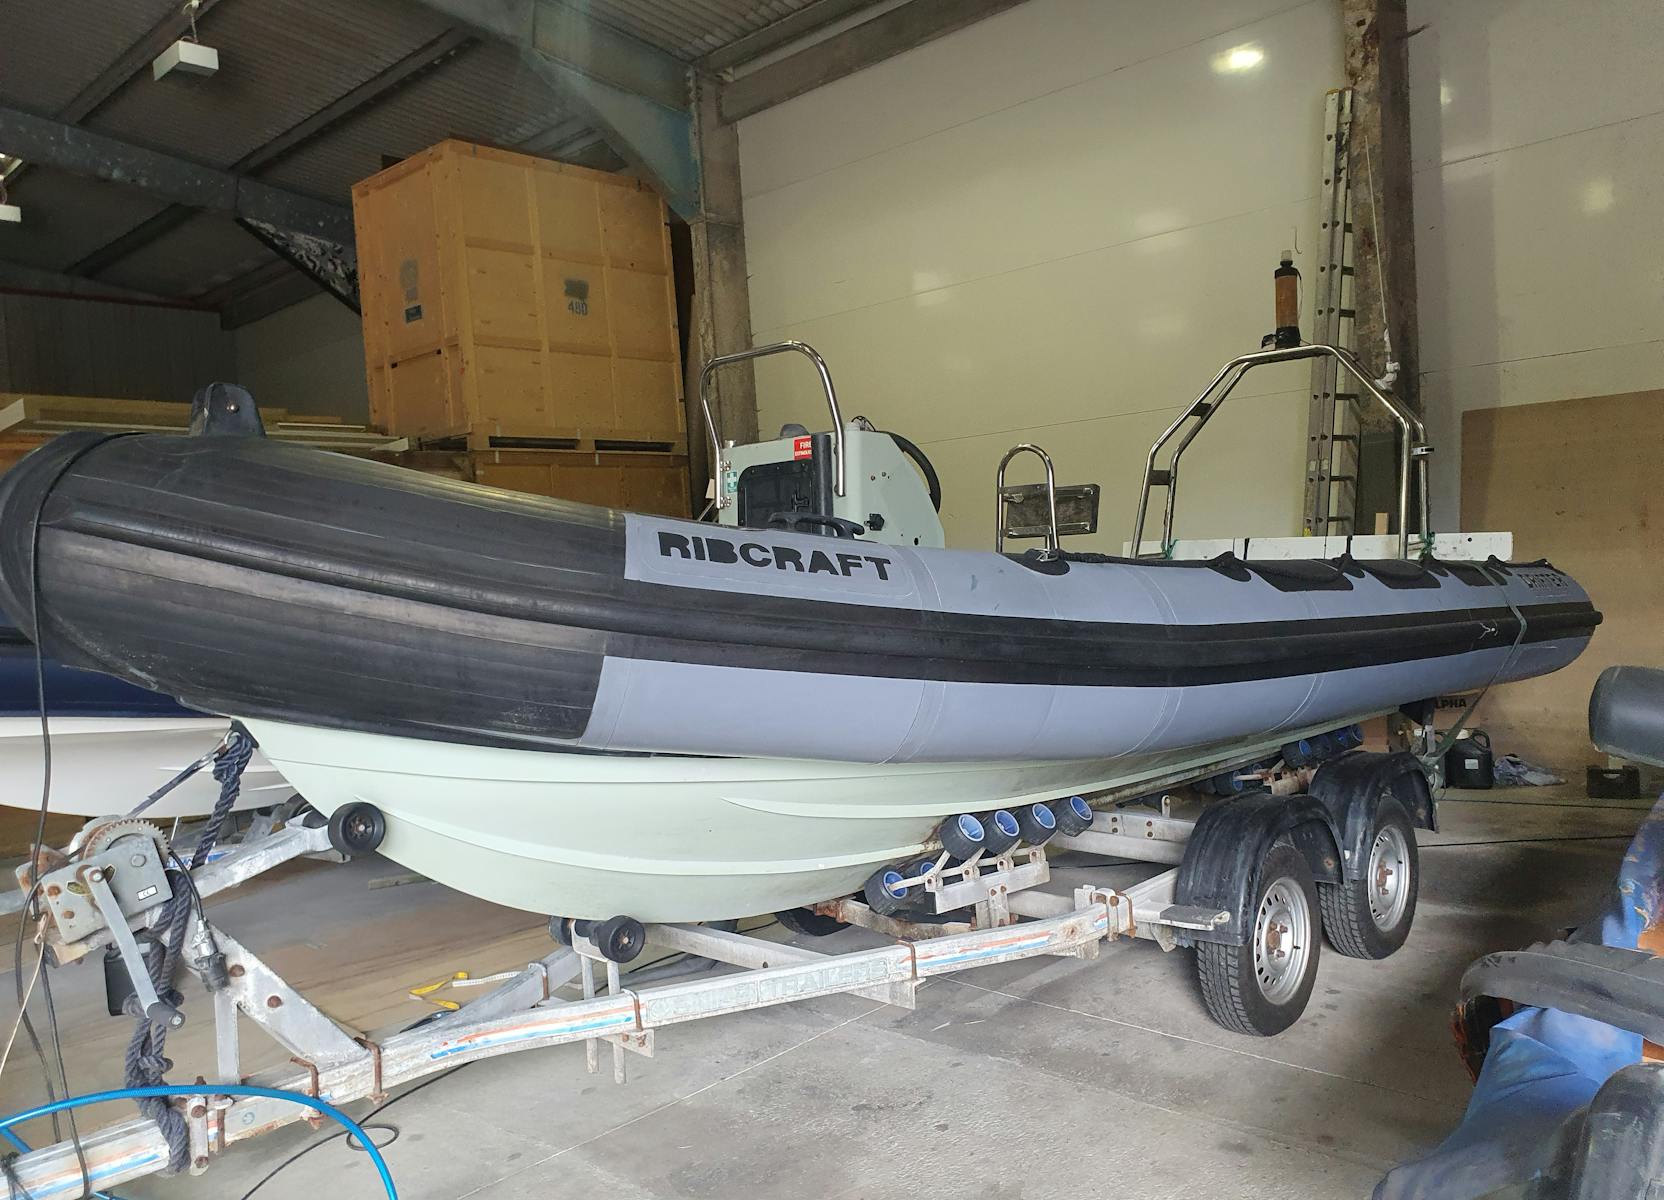 Ribcraft with a number of tube repairs